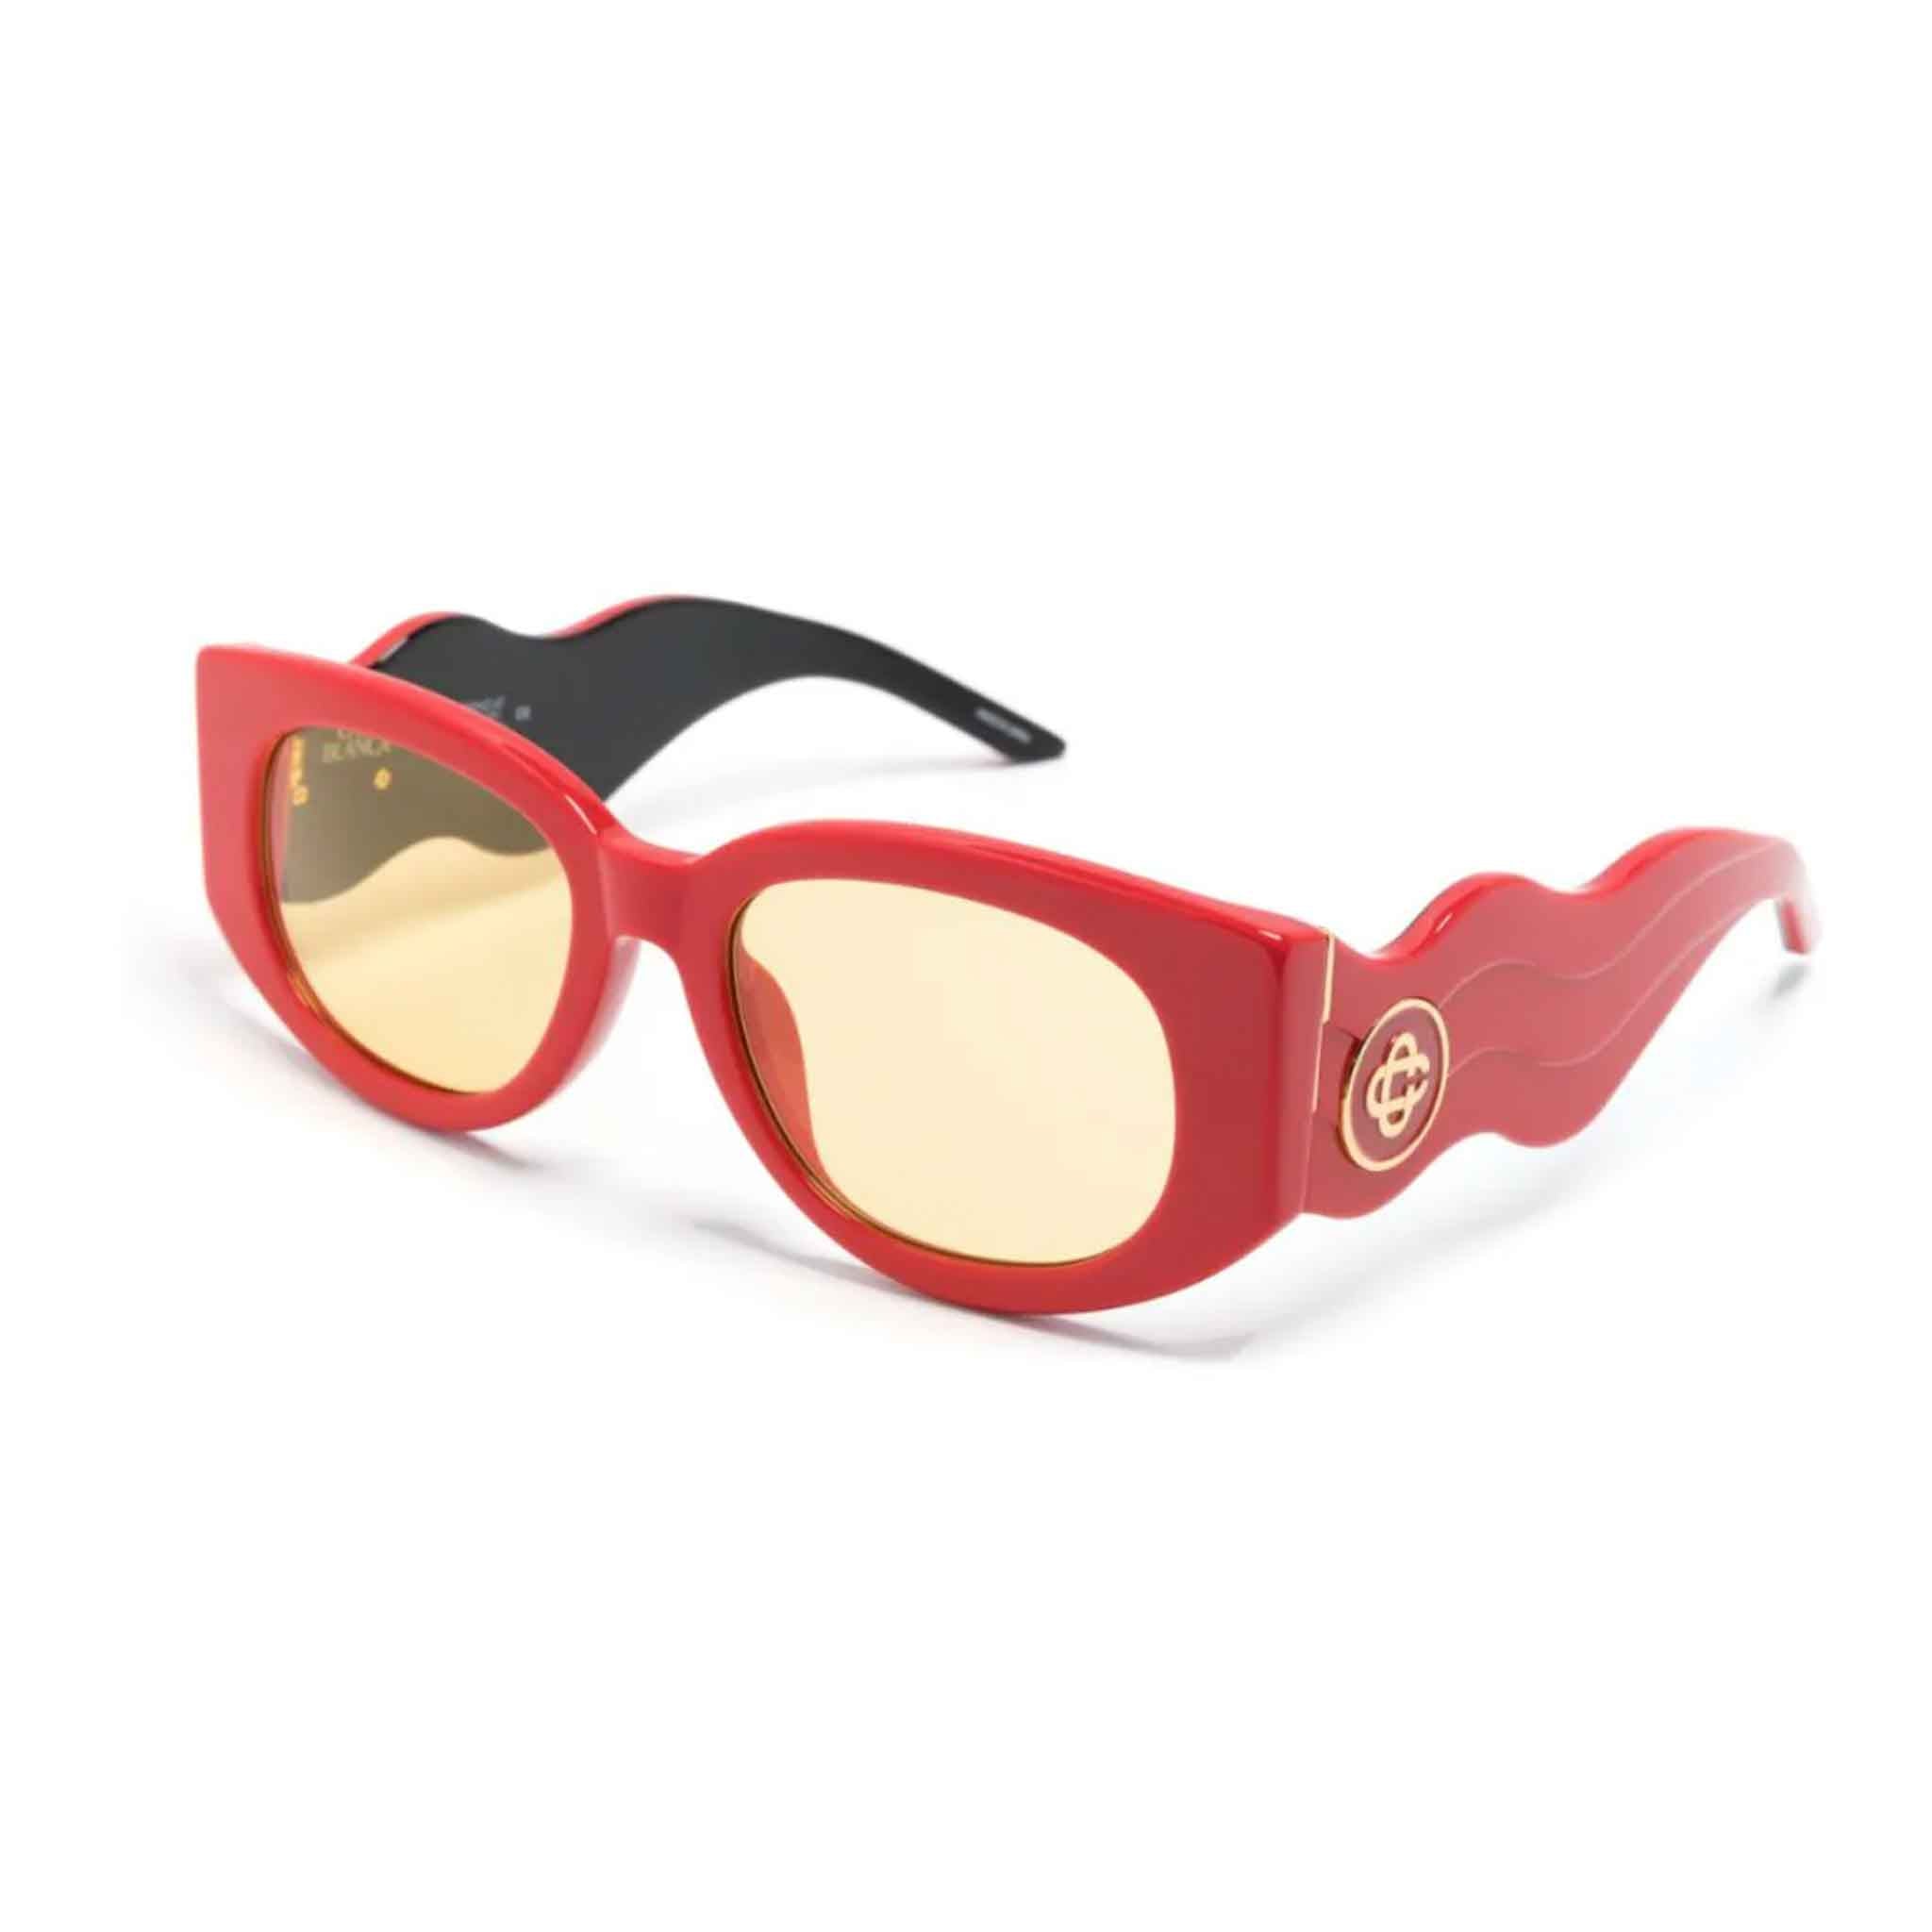 Casablanca Acetate & Metal Wave Oval Sunglasses in Red/Gold